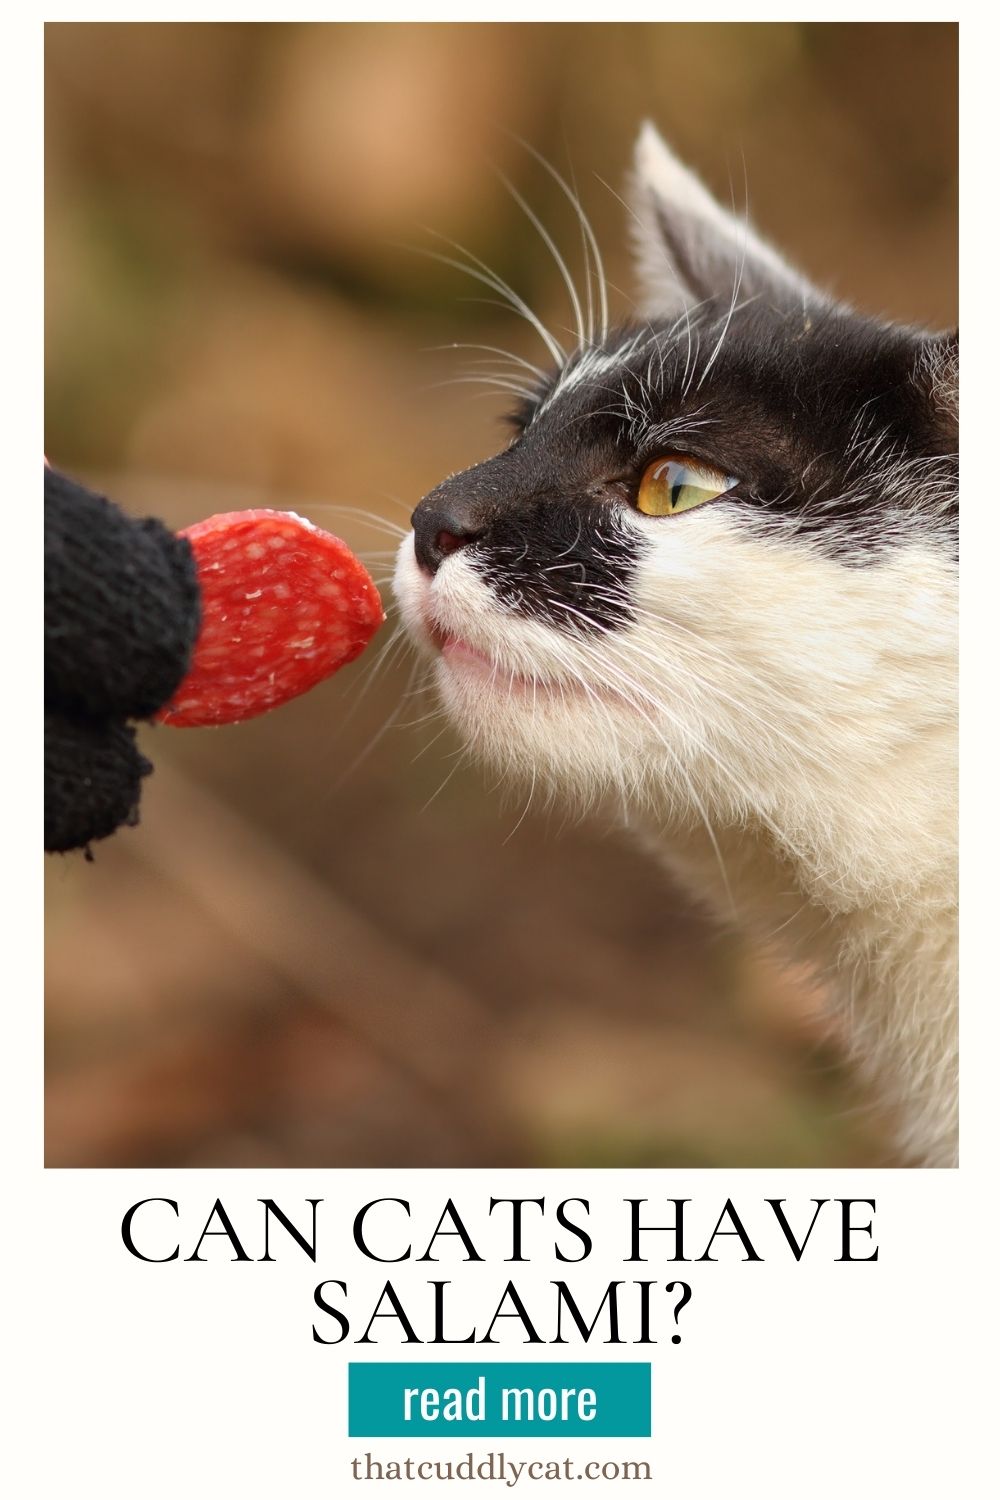 A cat sniffing a piece of salami